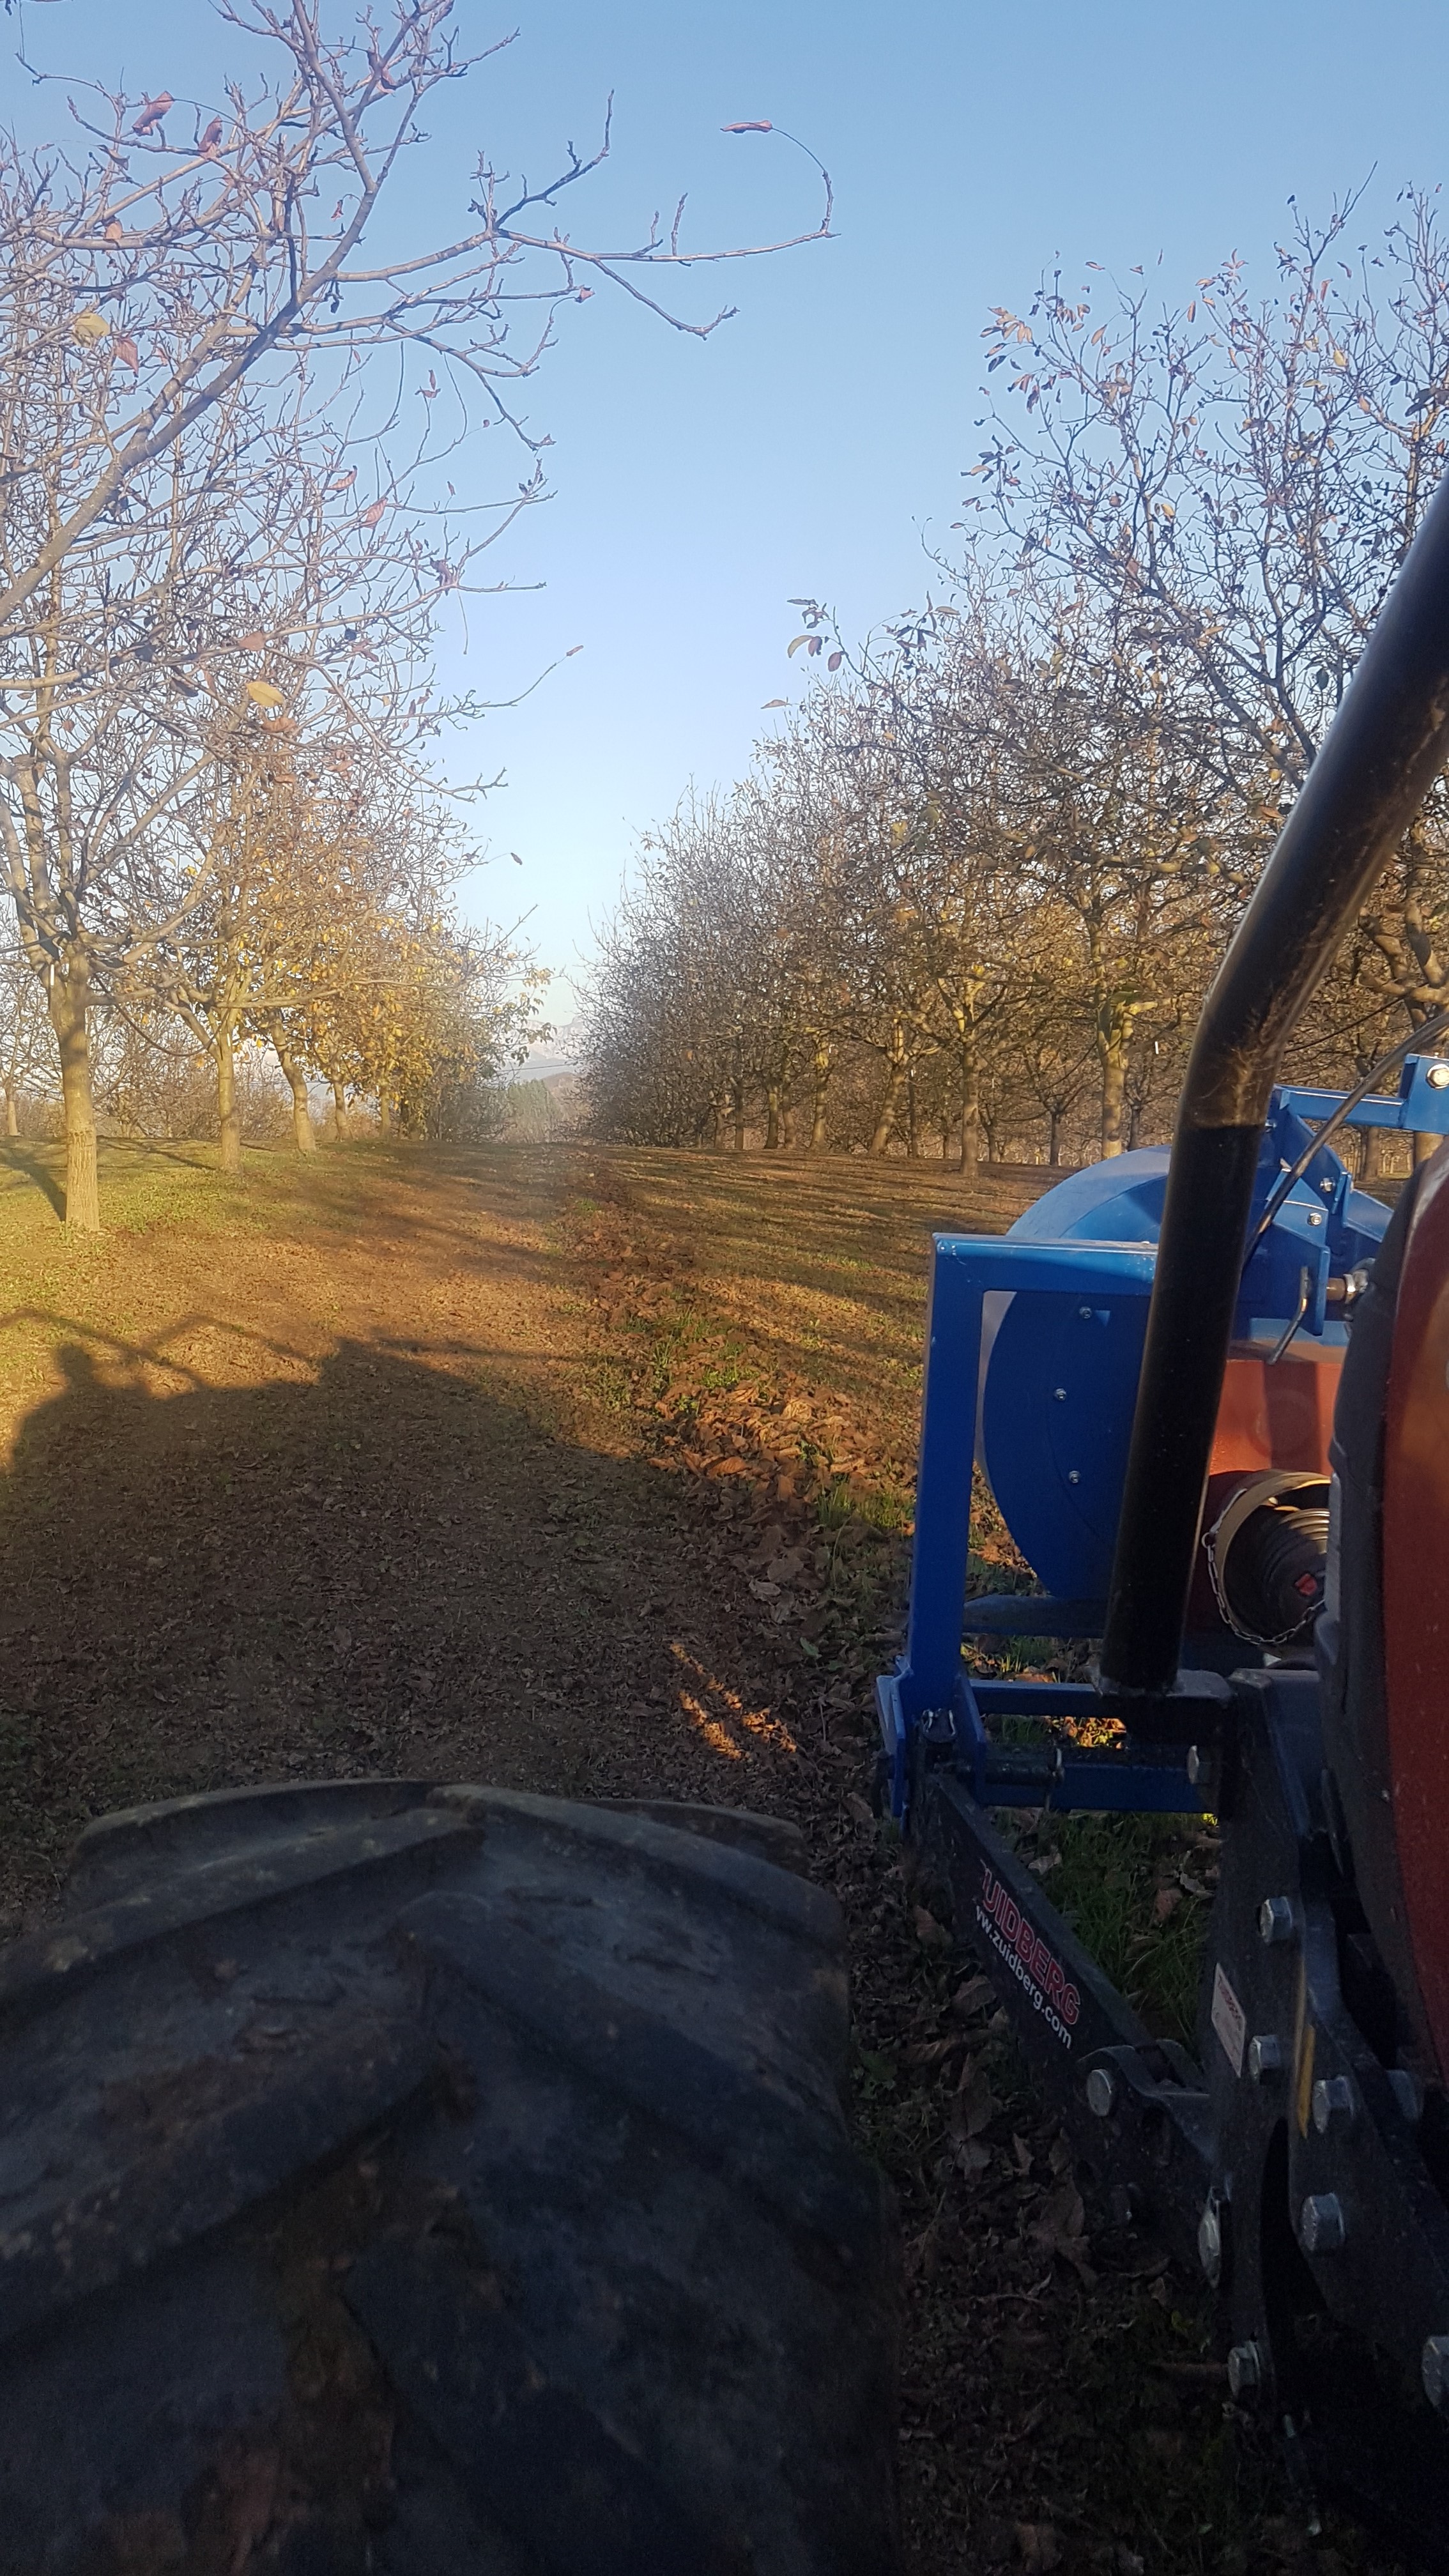 A tractor in a field of walnut trees